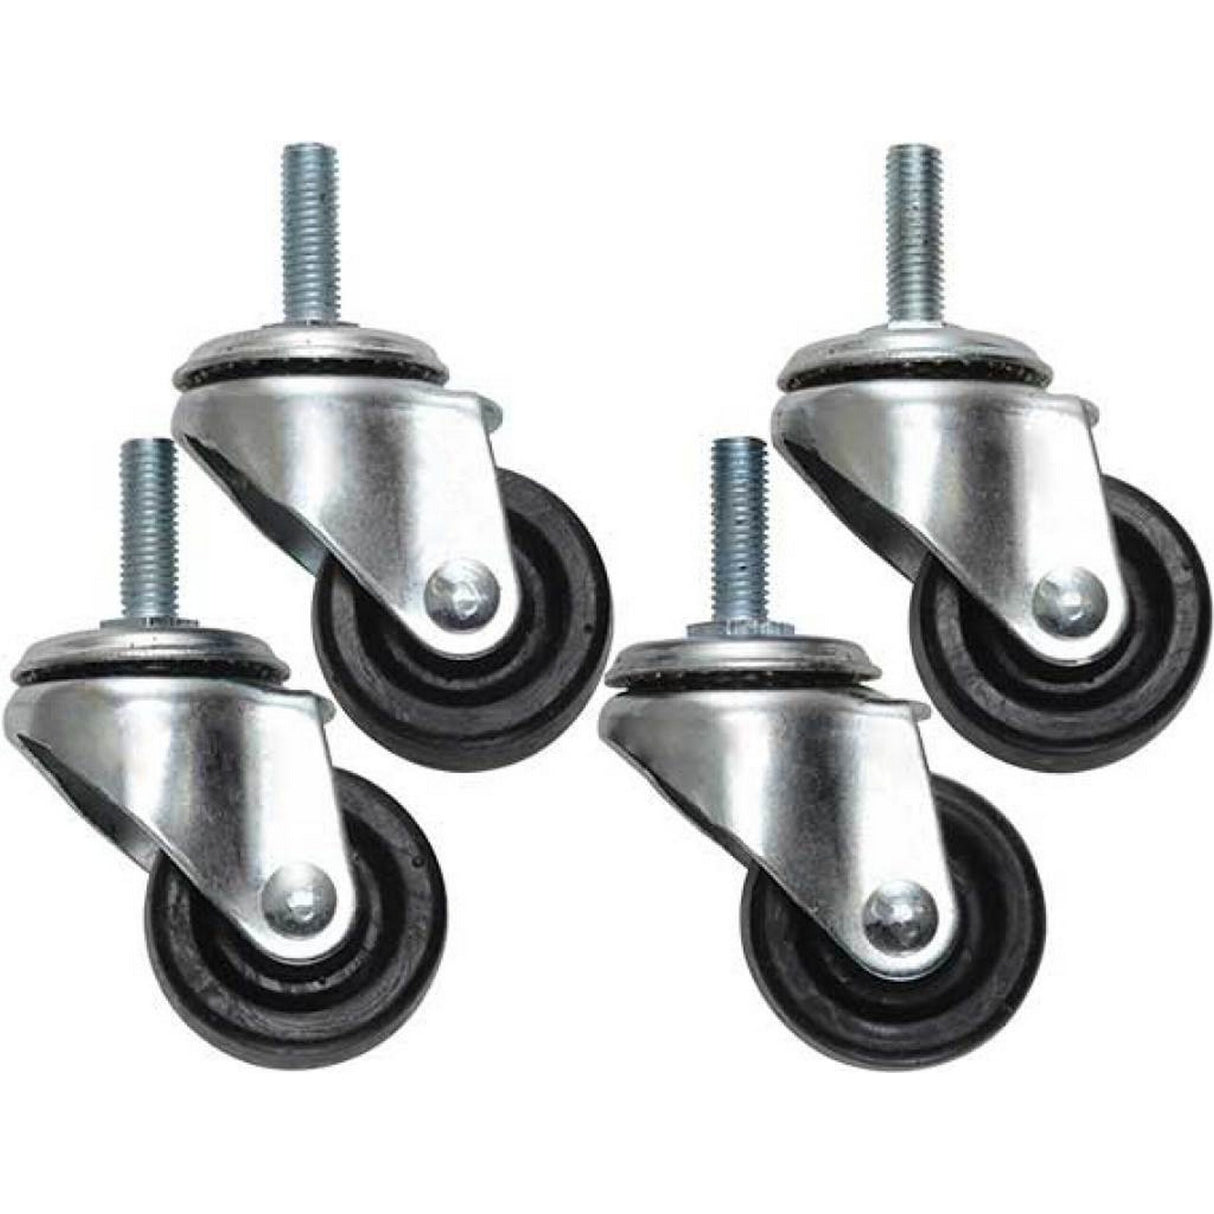 Sanus CA6CK Caster Kit for CFR1615 and CFR1620 Component Series, 4 Pack